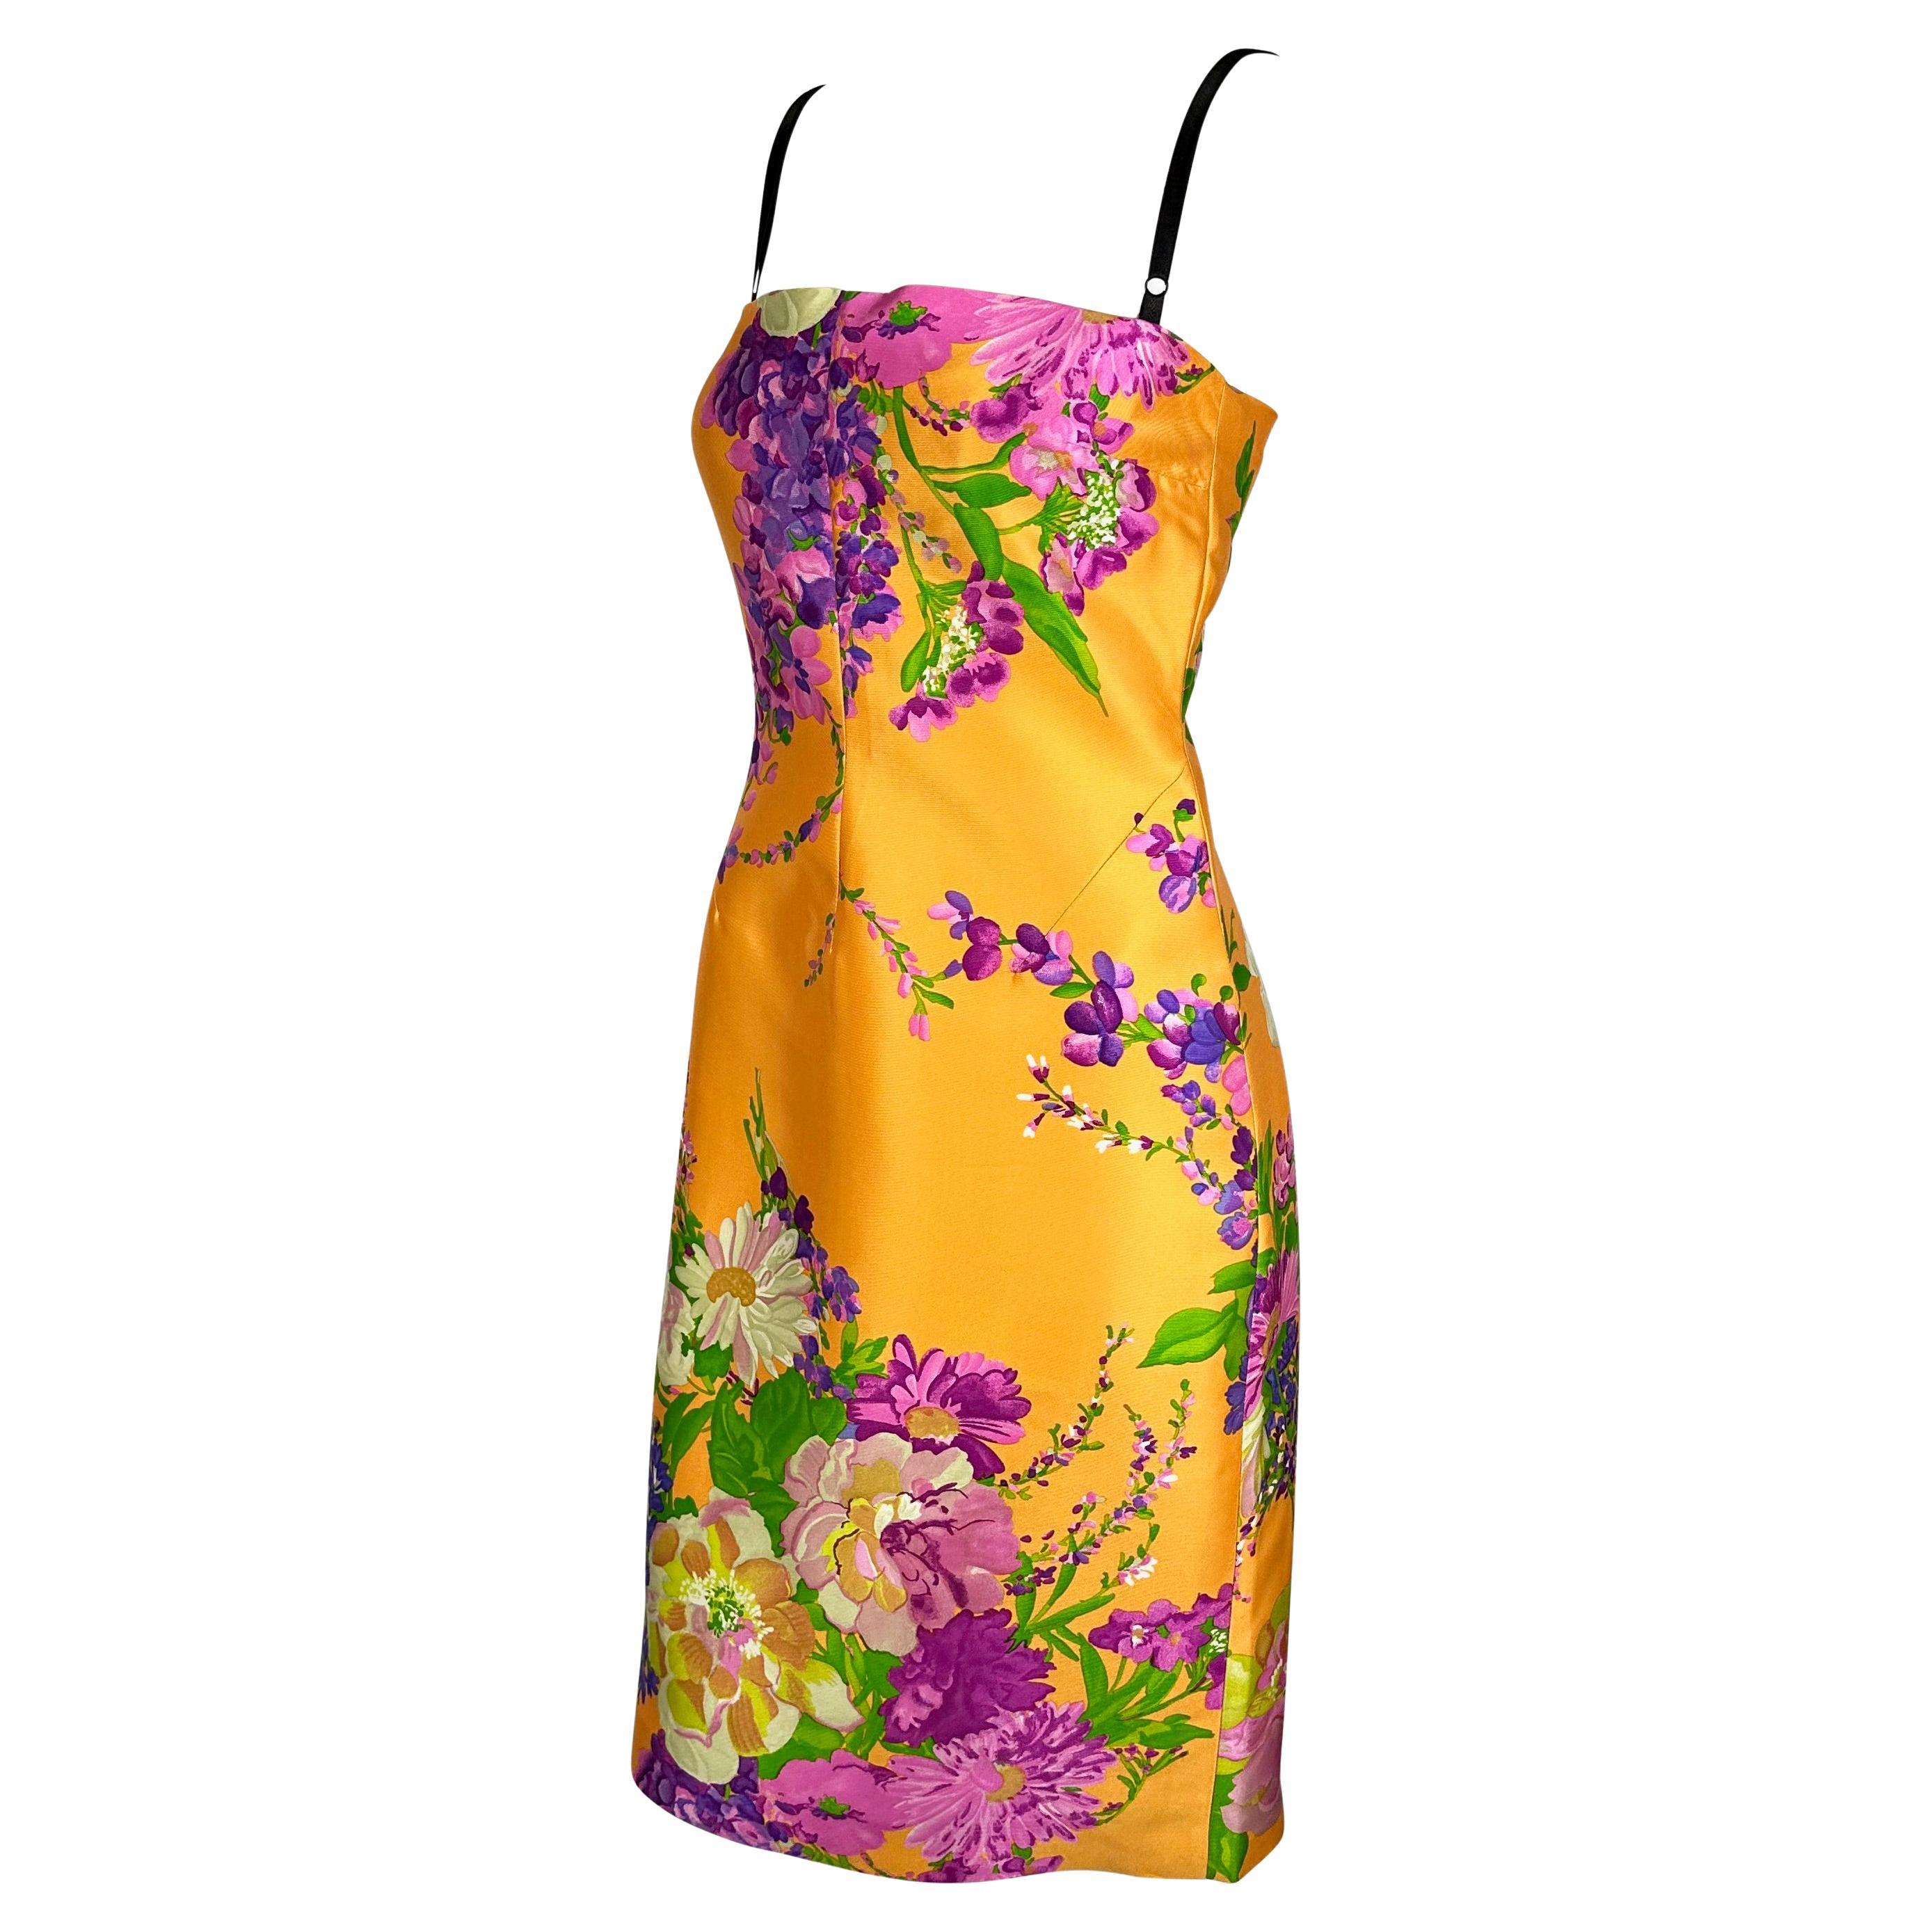 Presenting a fabulous vibrant orange floral Dolce and Gabbana Dress. This fantastic orange silk dress from the Spring/Summer 2000 collection features a large multicolored flower print. The dress has a built-in black lace bra that playfully pokes out